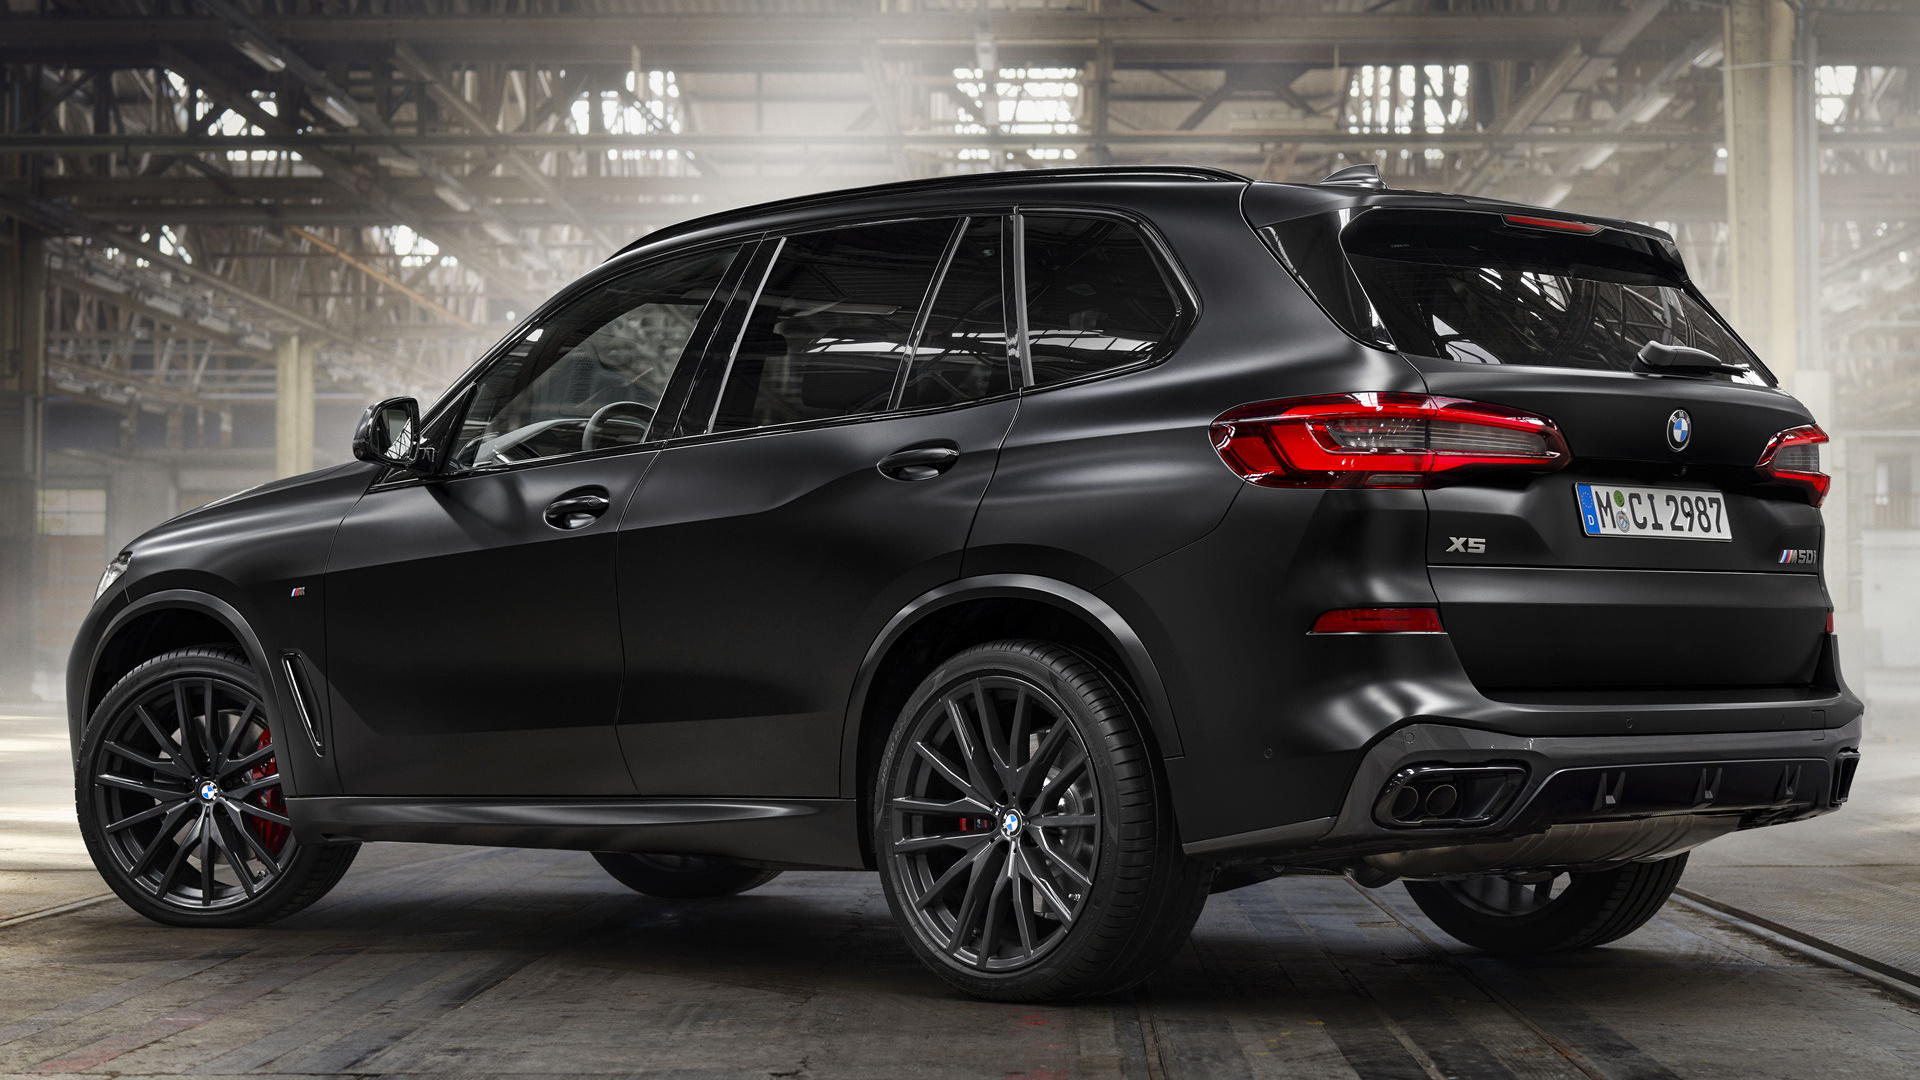 2021 BMW X5 M50i Black Vermilion Edition Wallpapers and HD Images